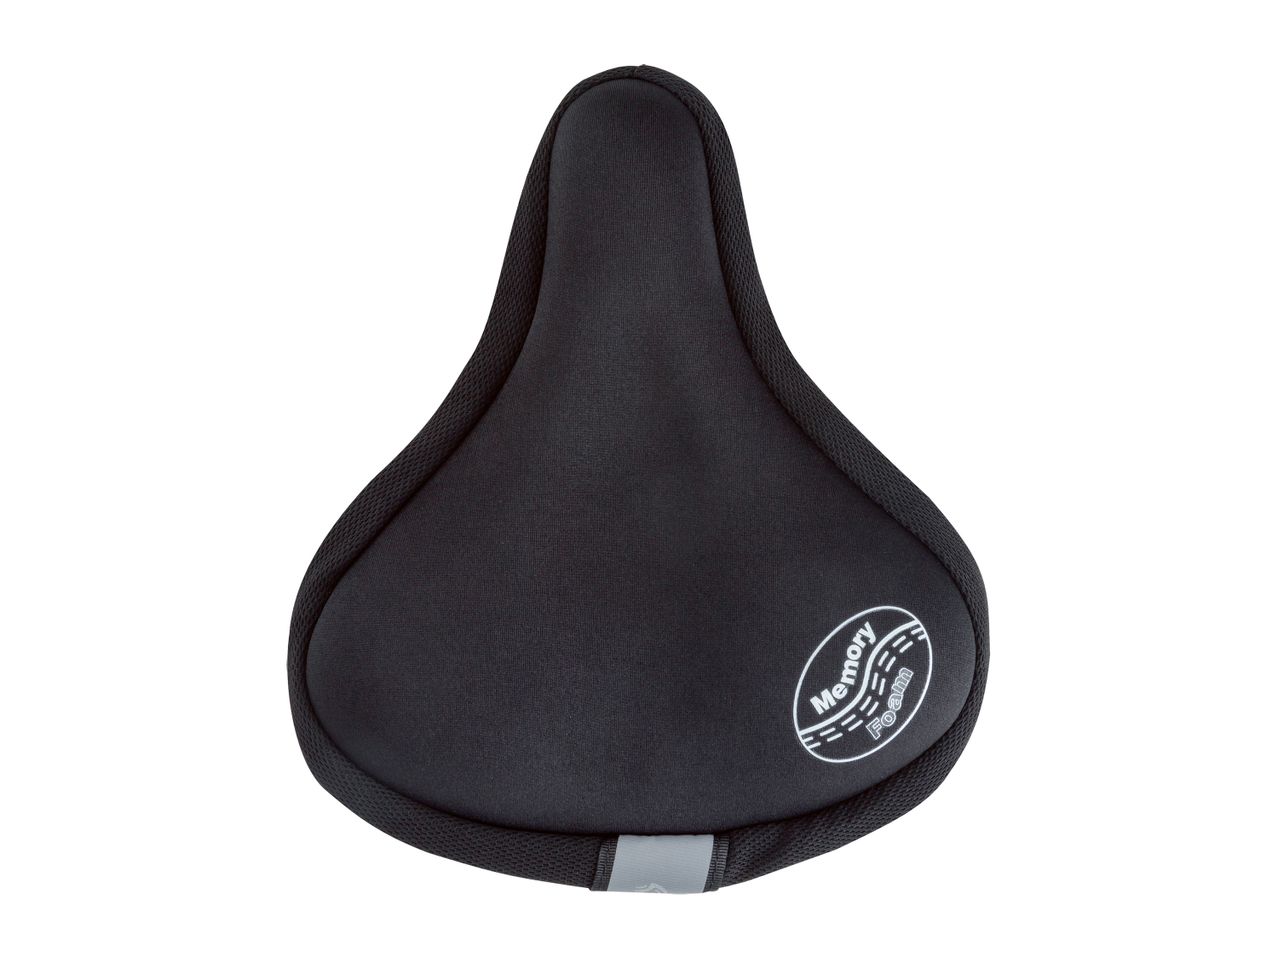 Go to full screen view: Crivit Saddle Cover With Memory Foam - Image 1